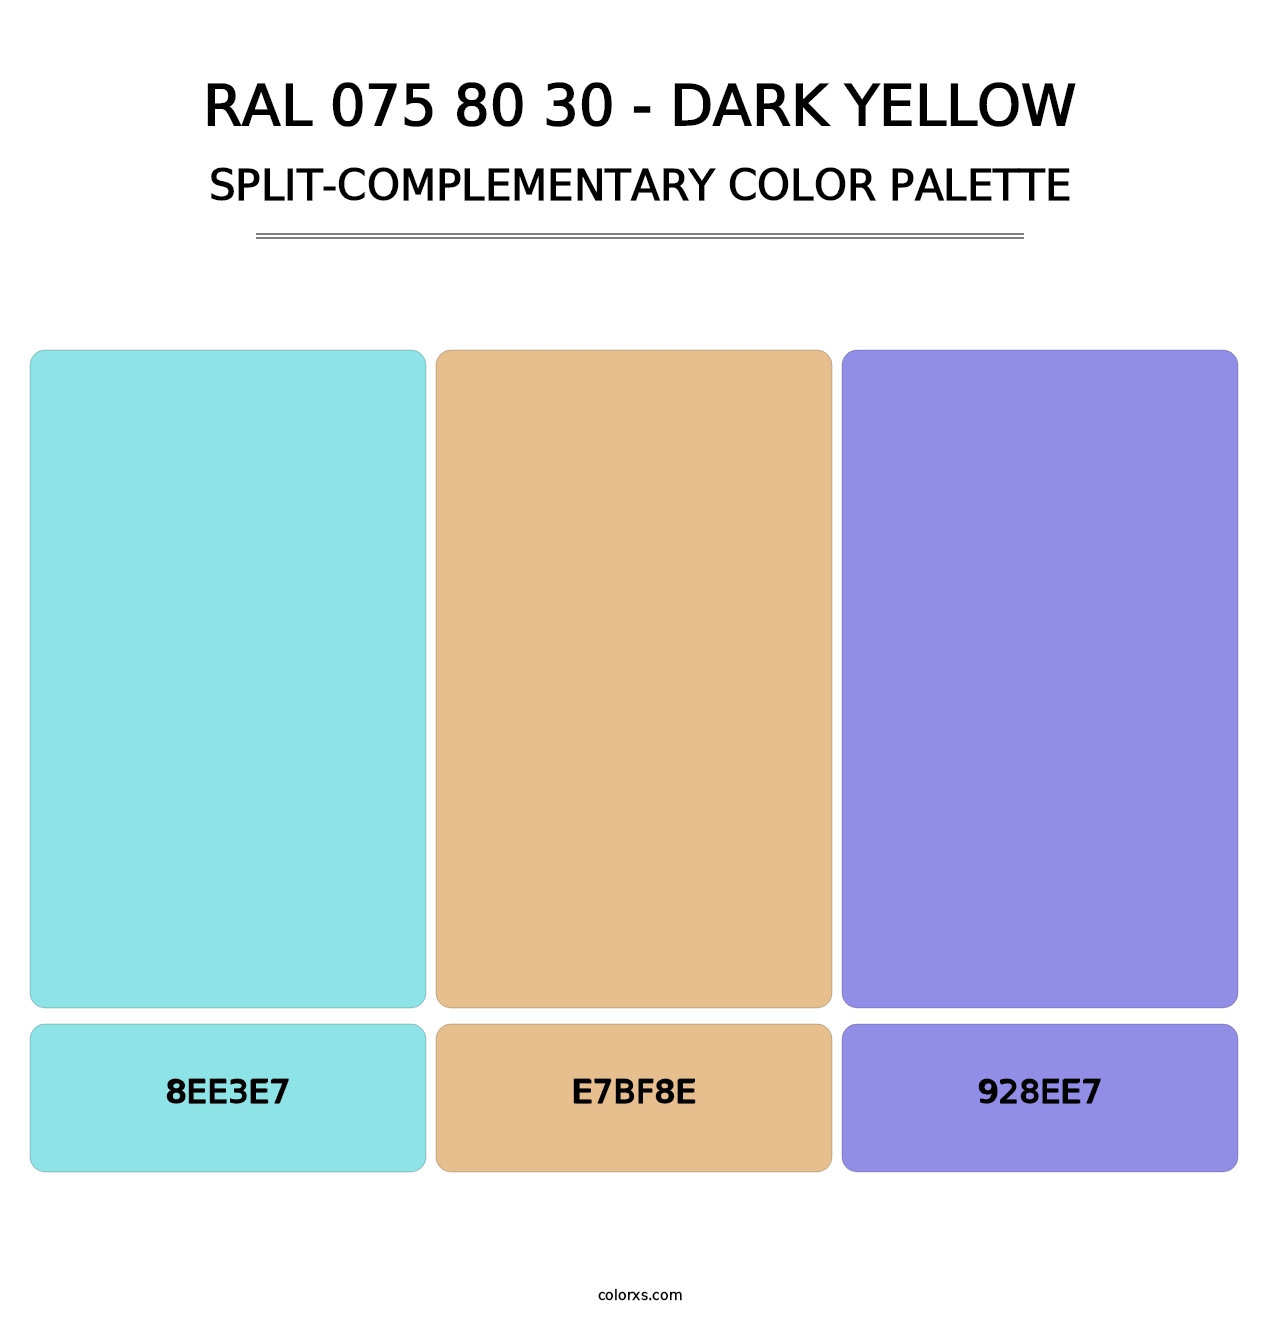 RAL 075 80 30 - Dark Yellow - Split-Complementary Color Palette